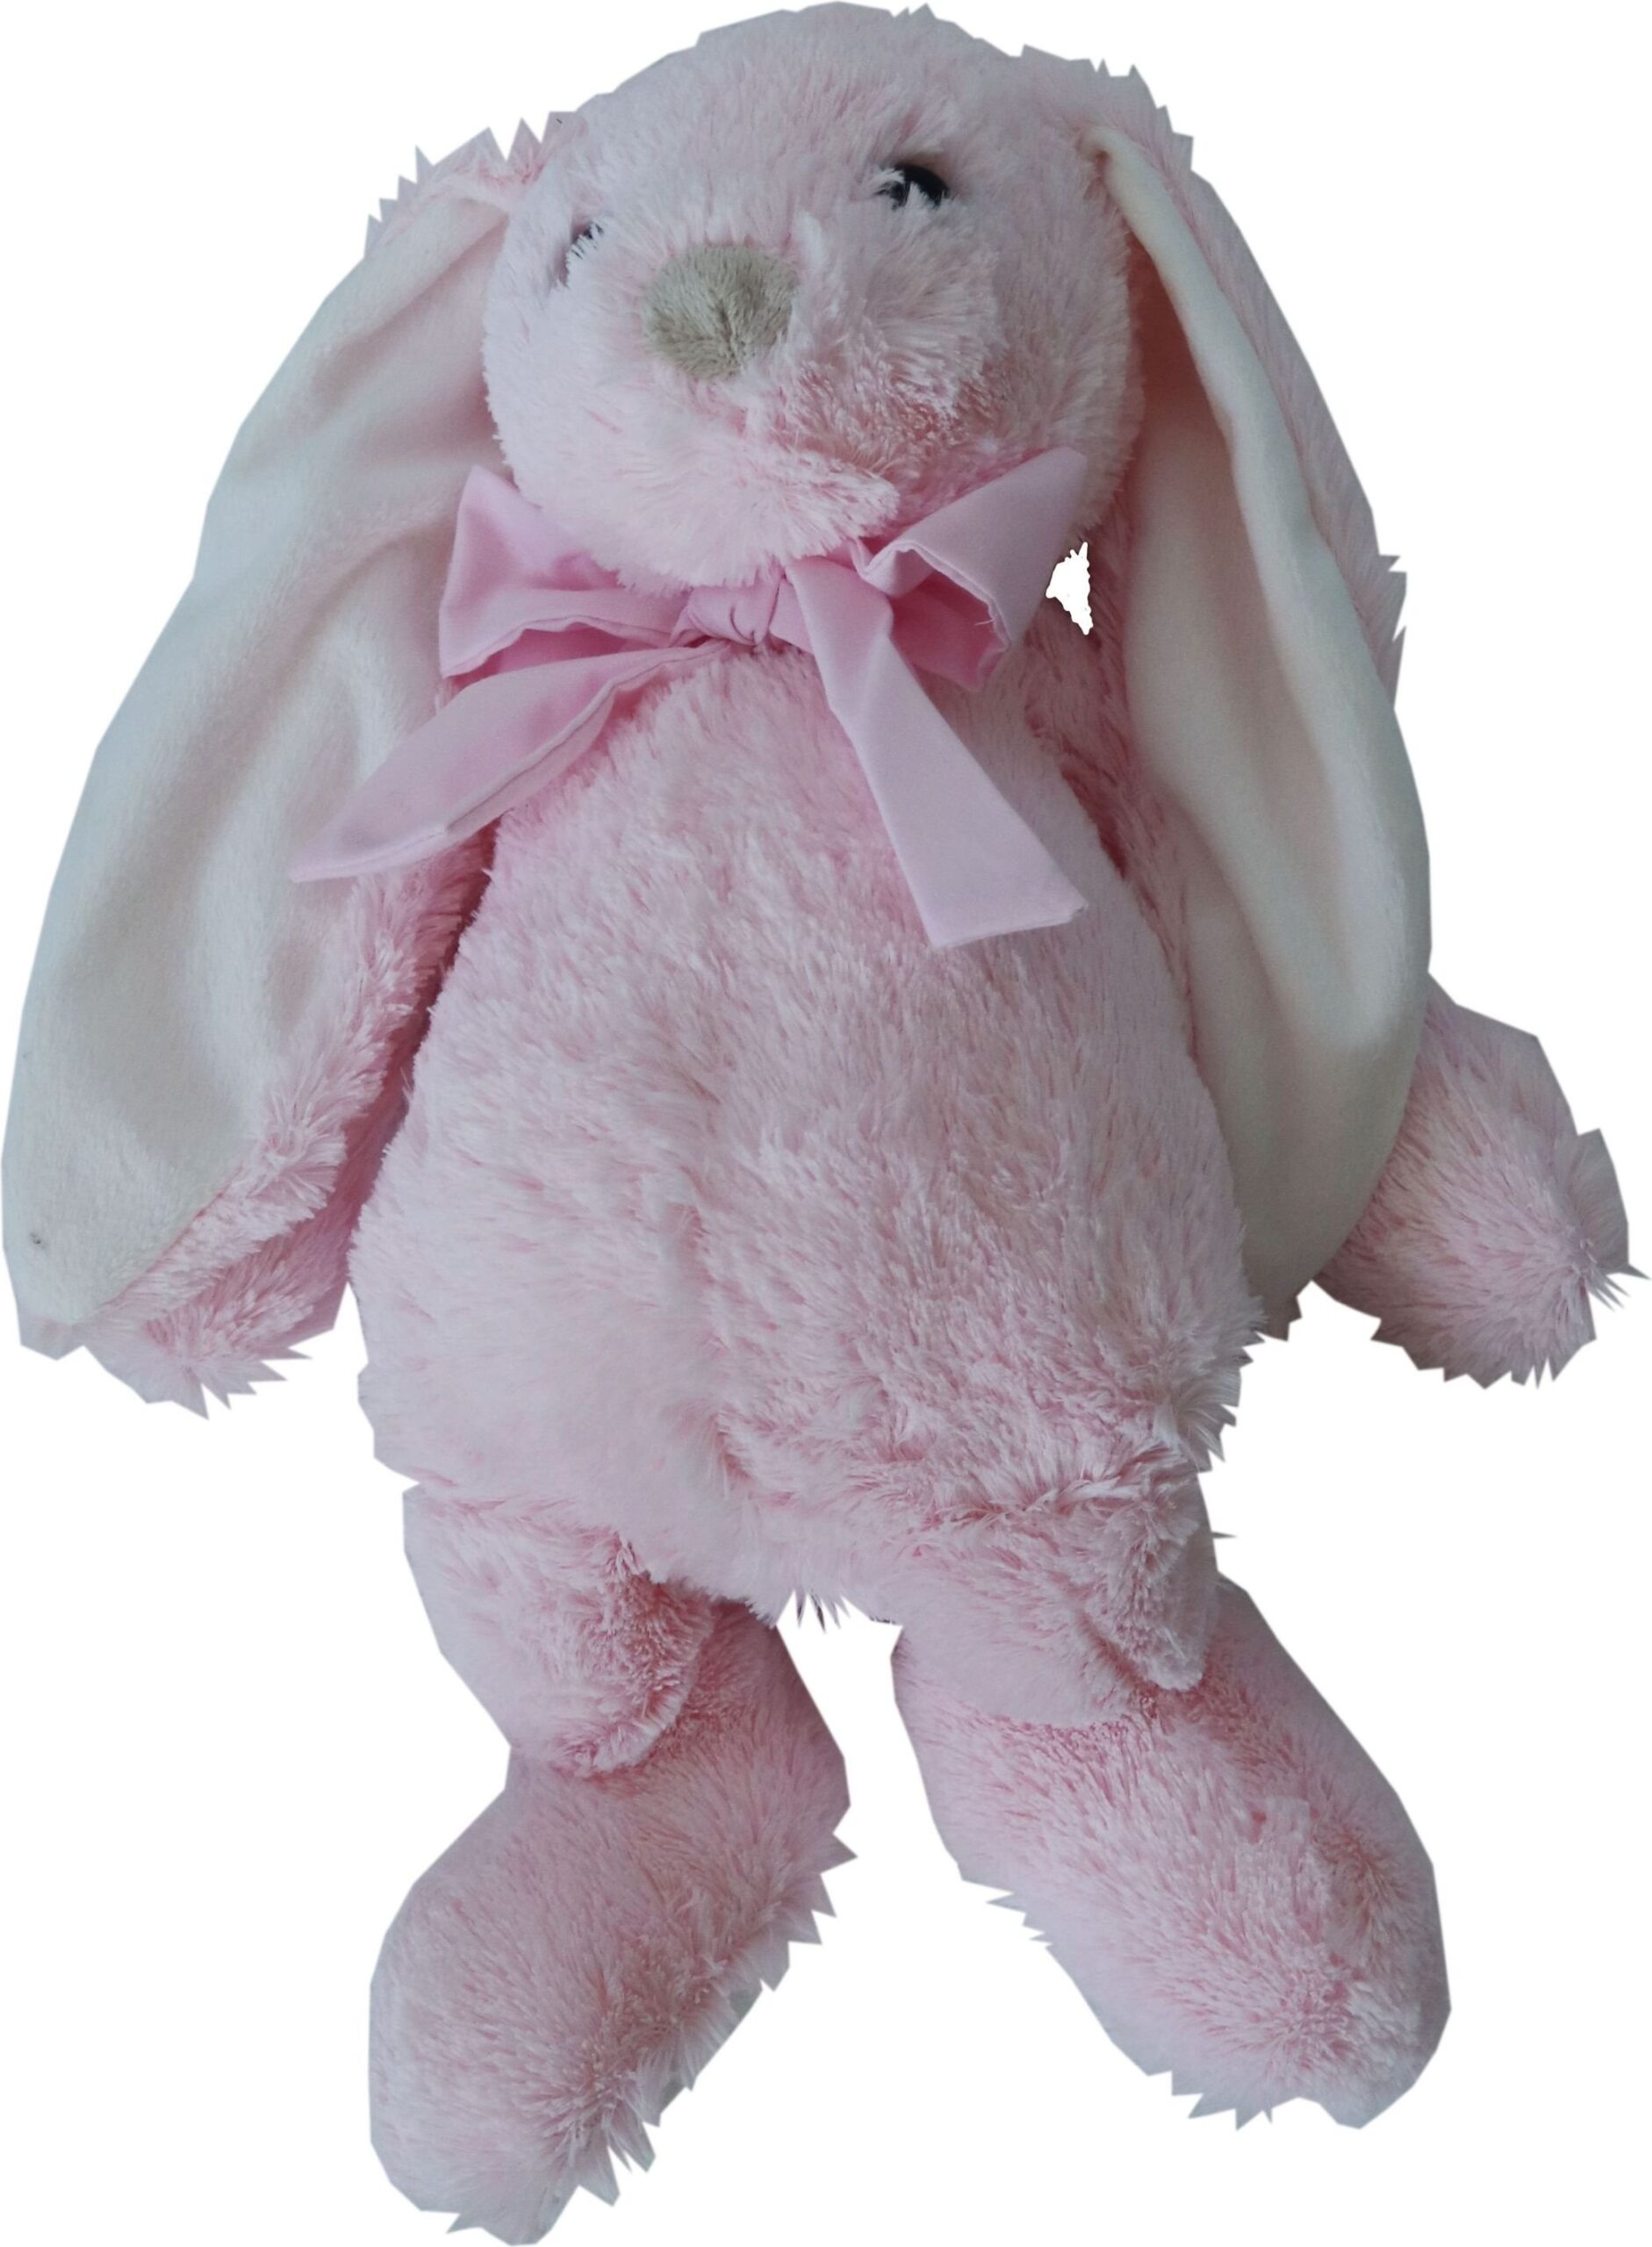 SNUGGLETIME CLASSIC BABY BUNNY PINK